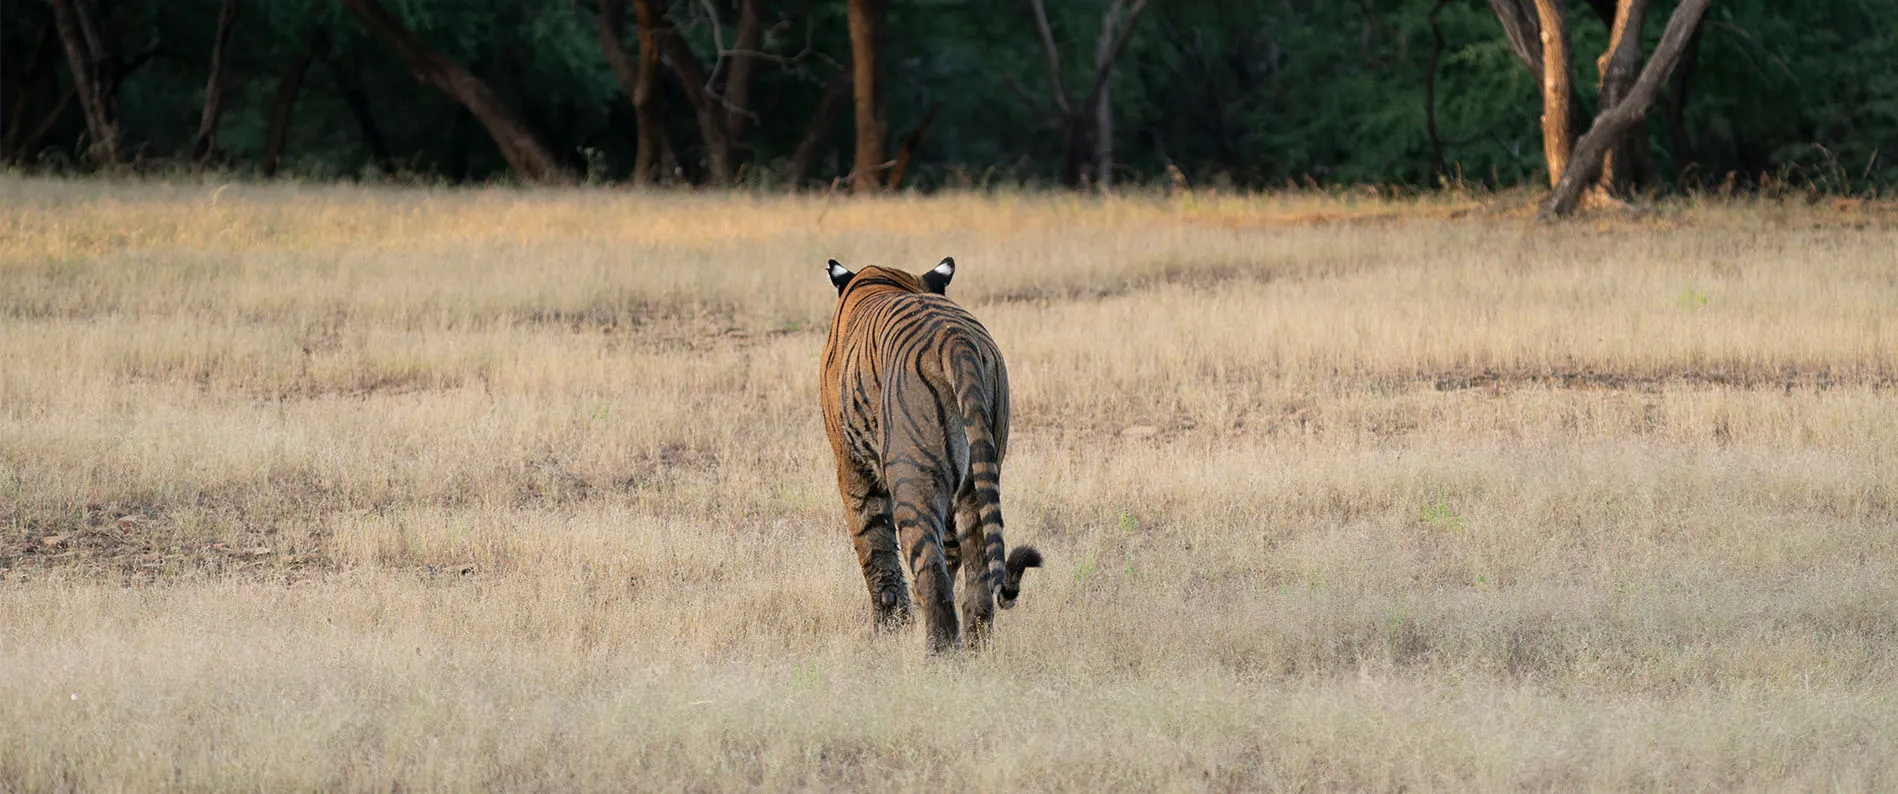 During the Ranthambore tiger safari, we captured the roaming tiger on the fields giving a great view. Do go on the safari.